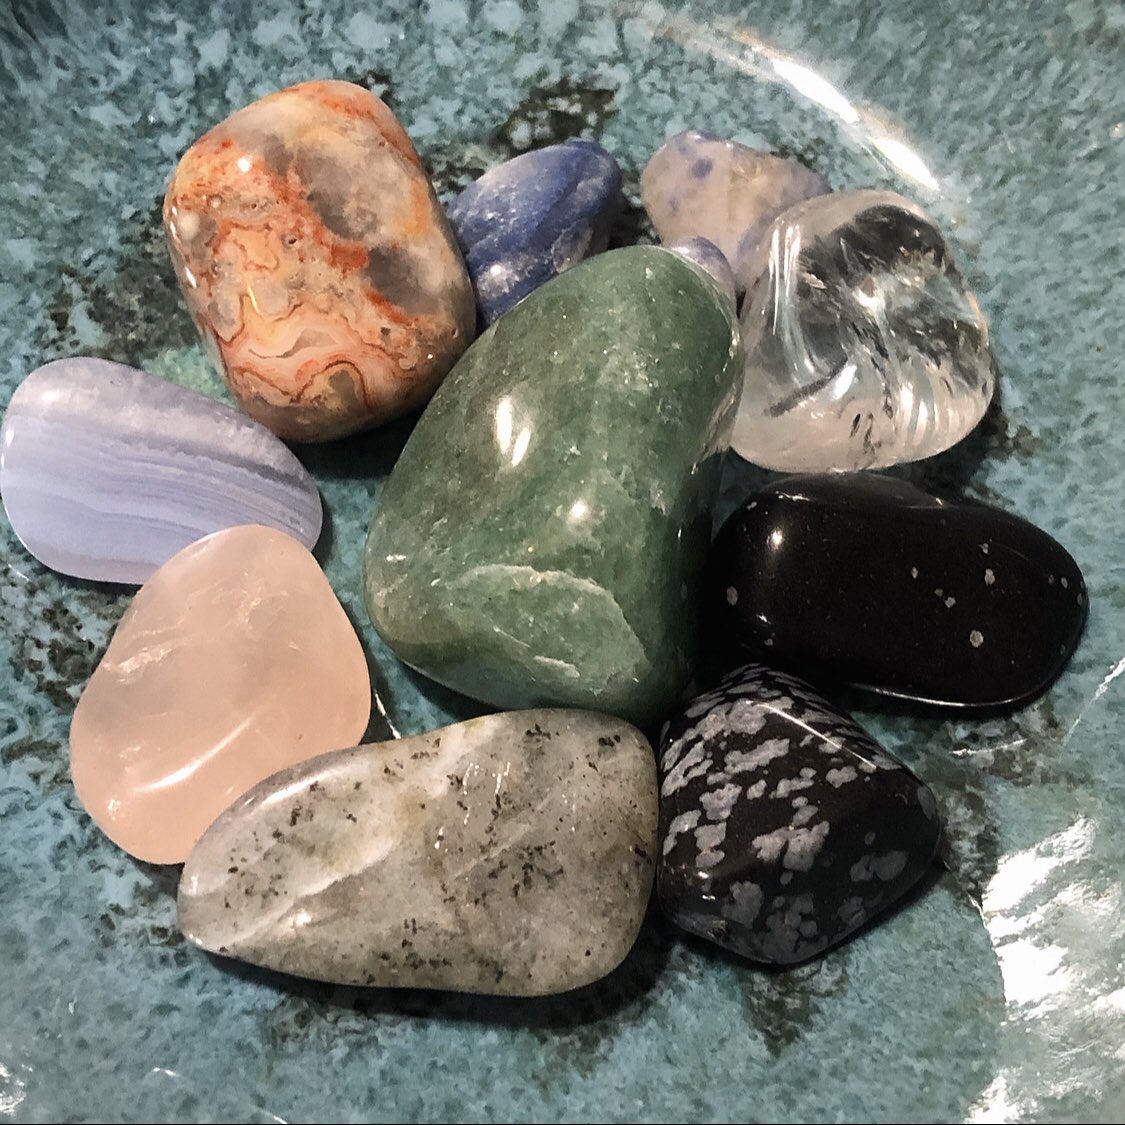 Memorial Day Specials    ends 5.26.2020    at midnight PST Gemstone bundles, mystery pendants with the purchase of a zodiac pendant, 3 for $37 simple twists, and 2 for $25 minis!(a thread)